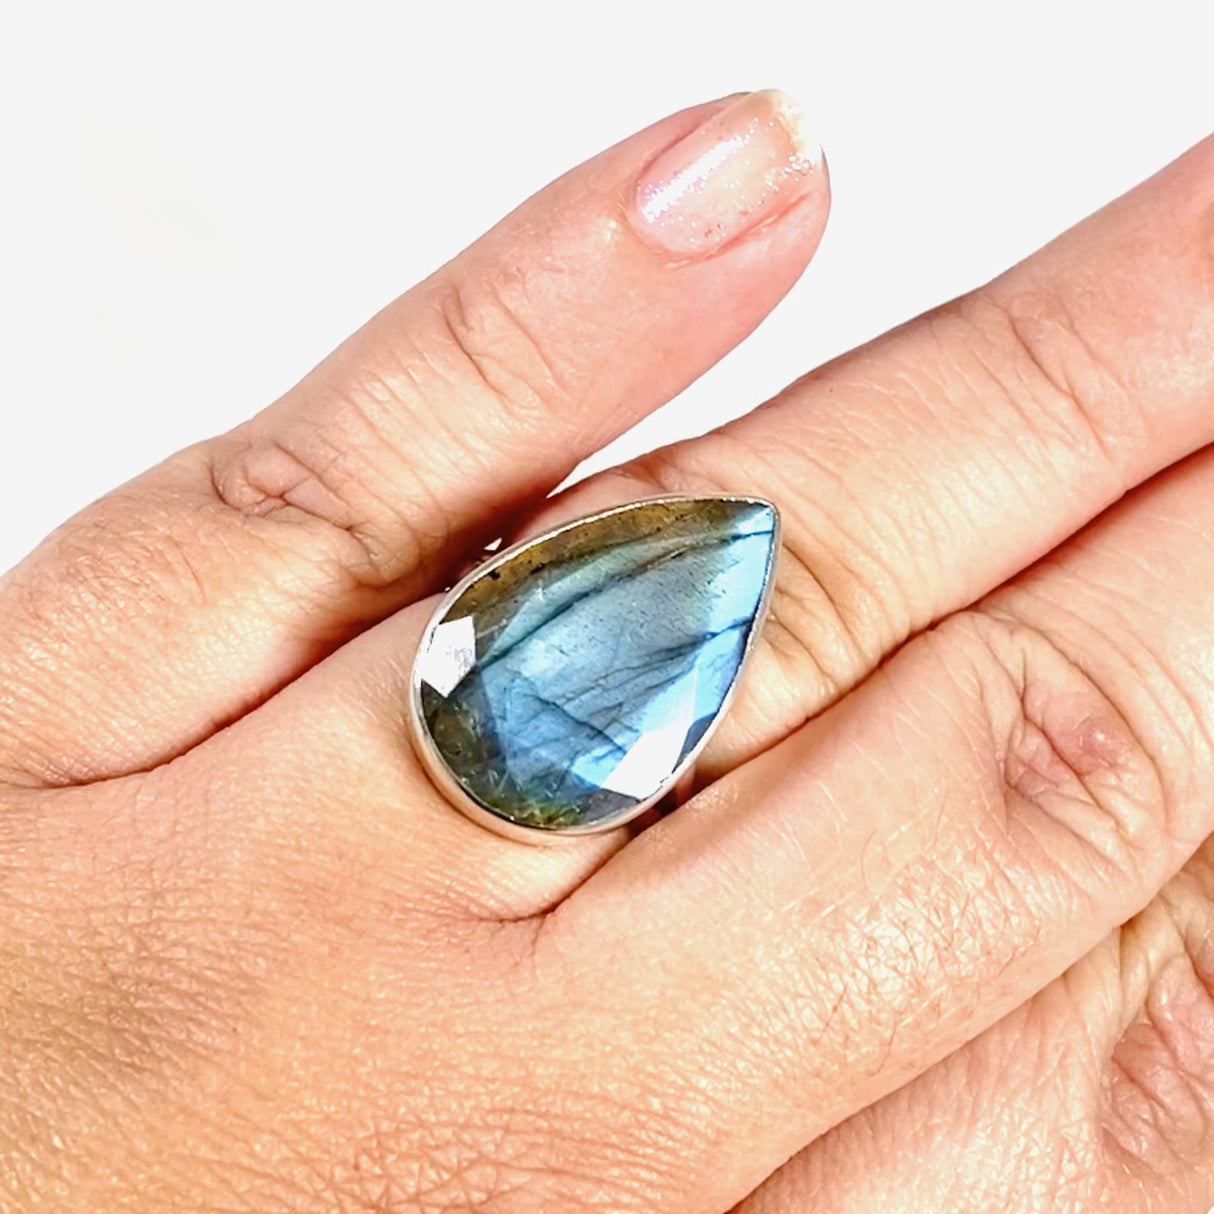  Blue iridescent Labradorite faceted gemstone and silver ring on a hand